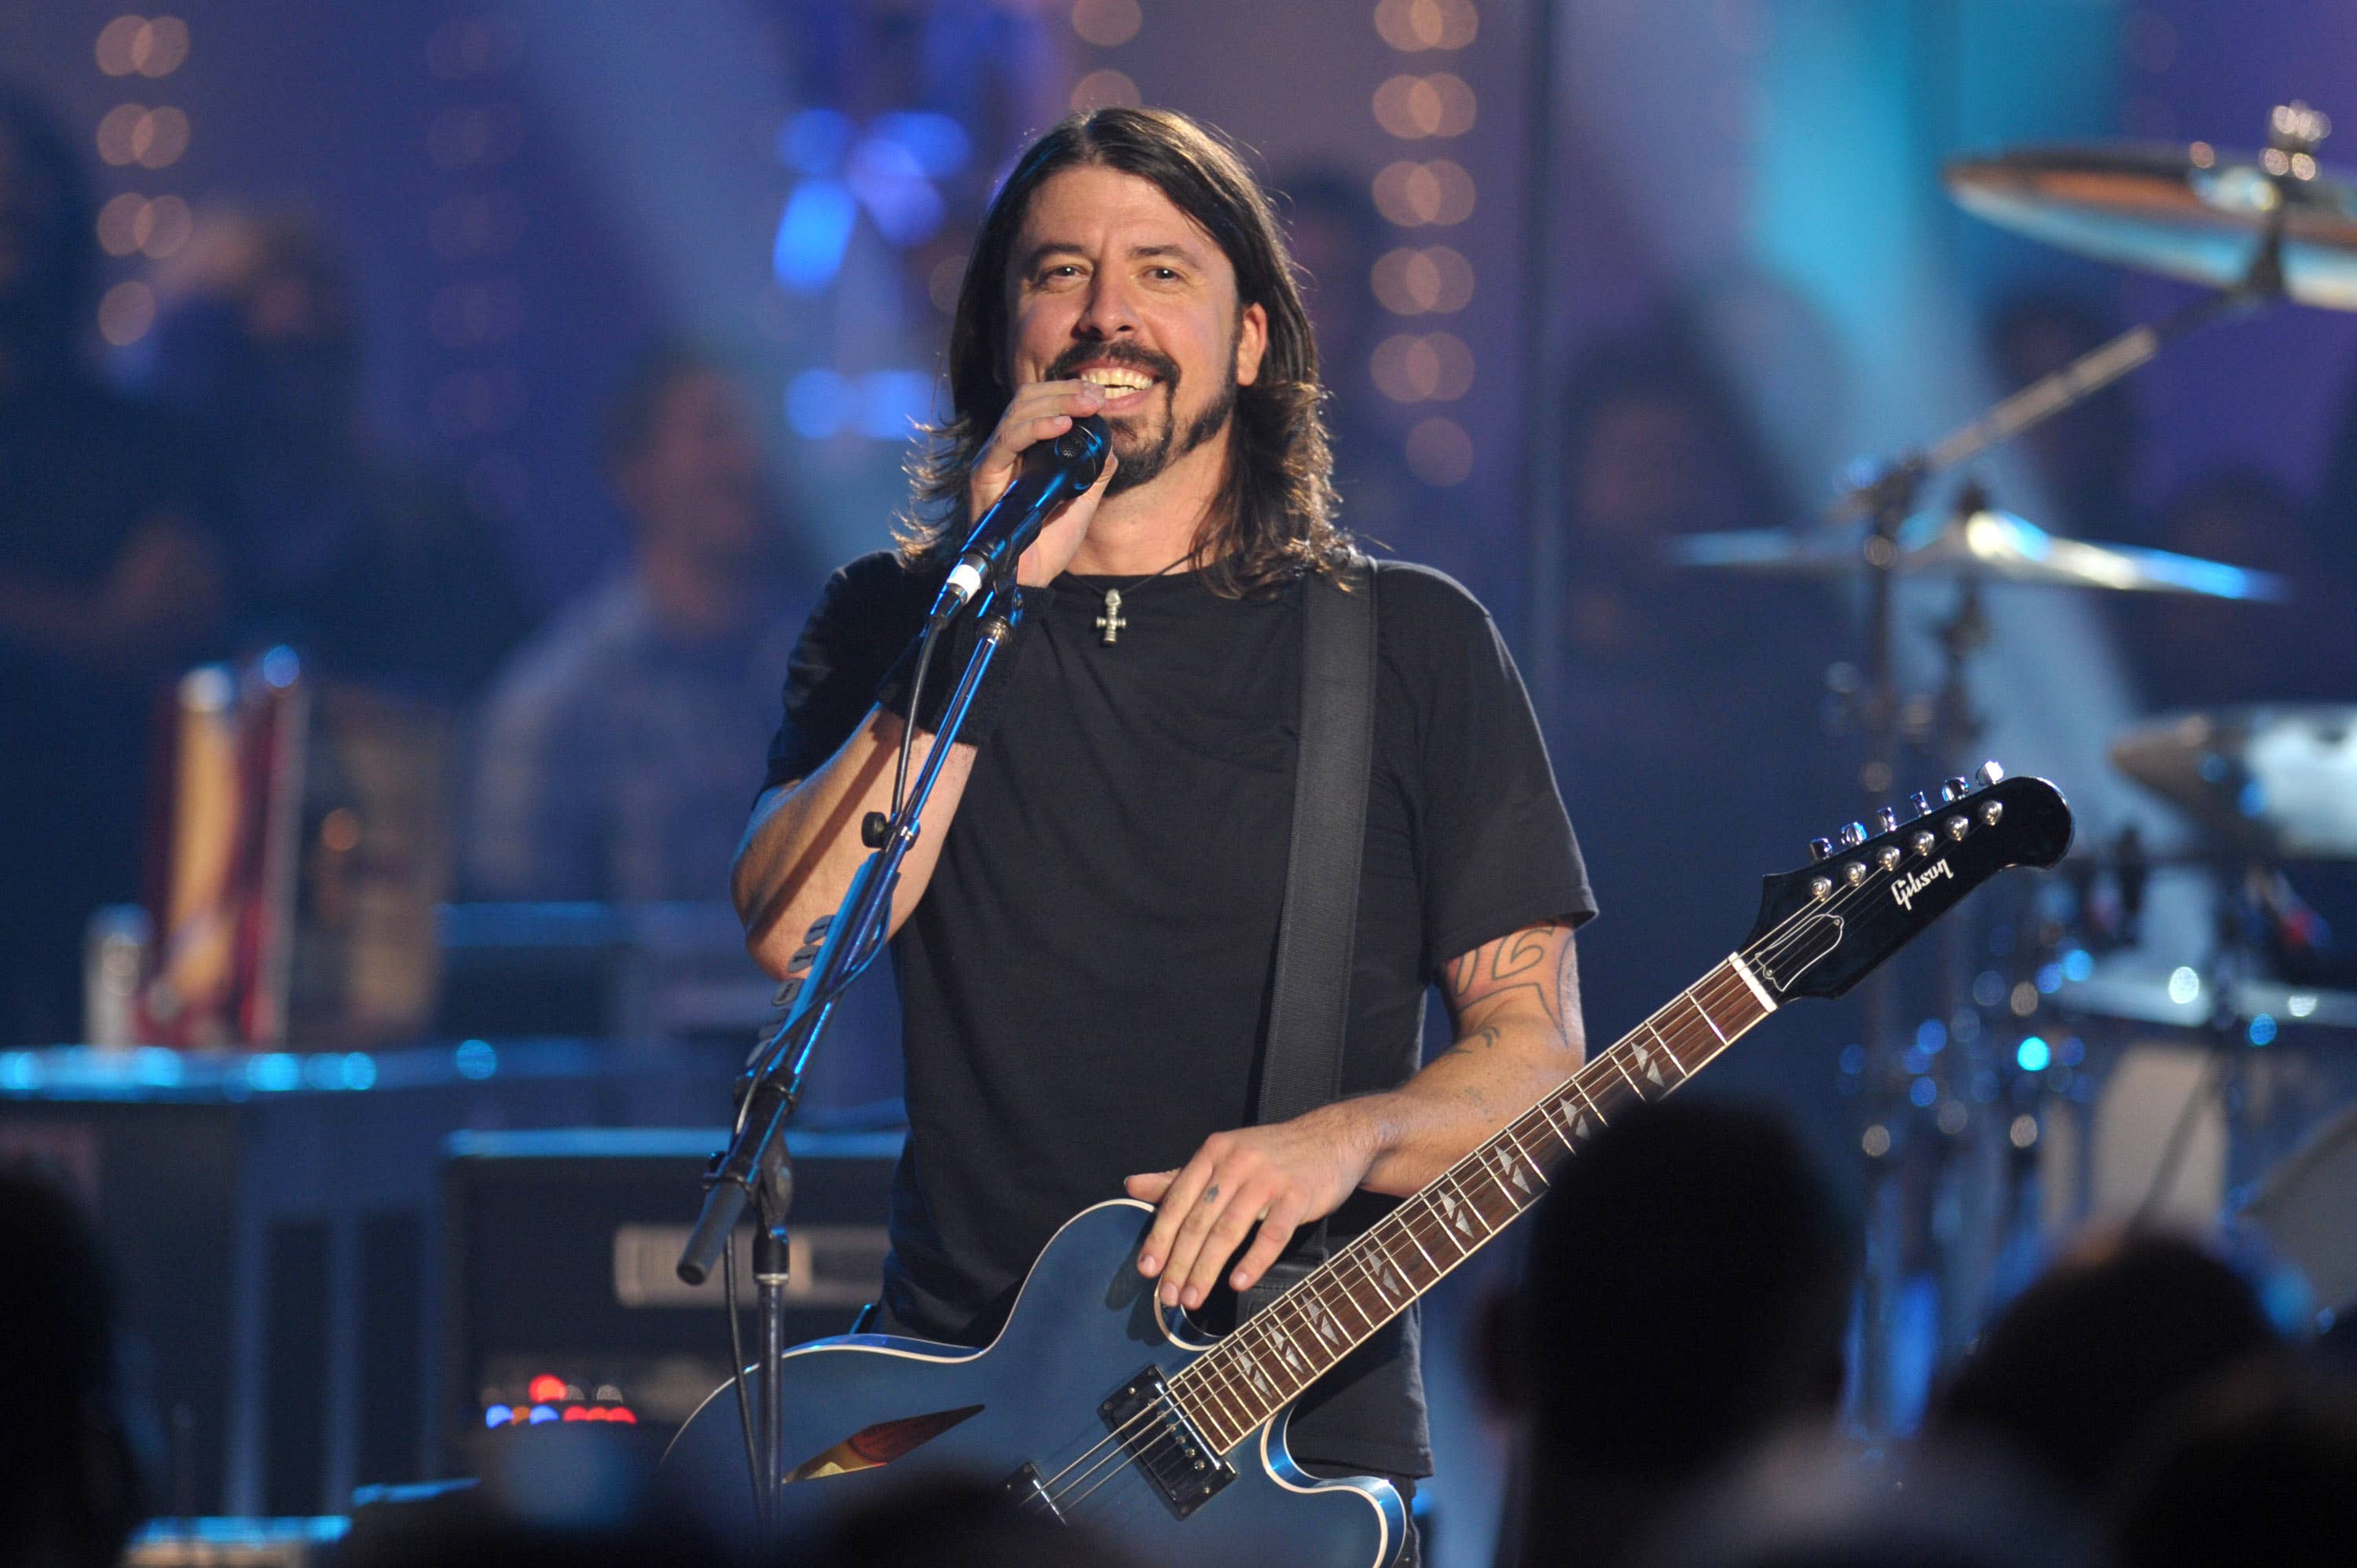 Canadian lover Dave Grohl